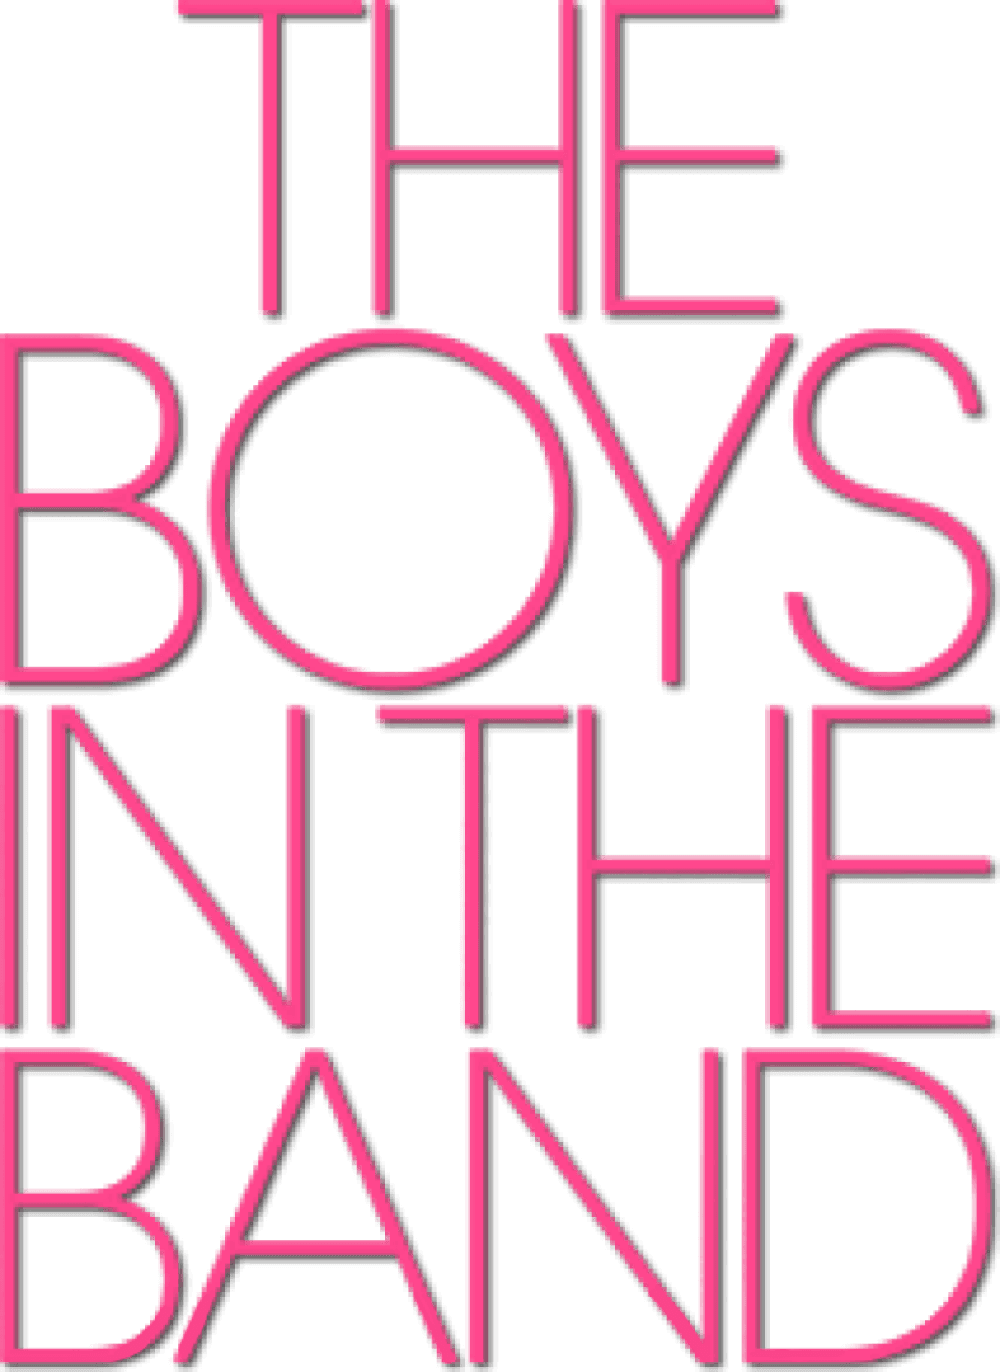 The Boys in the Band logo